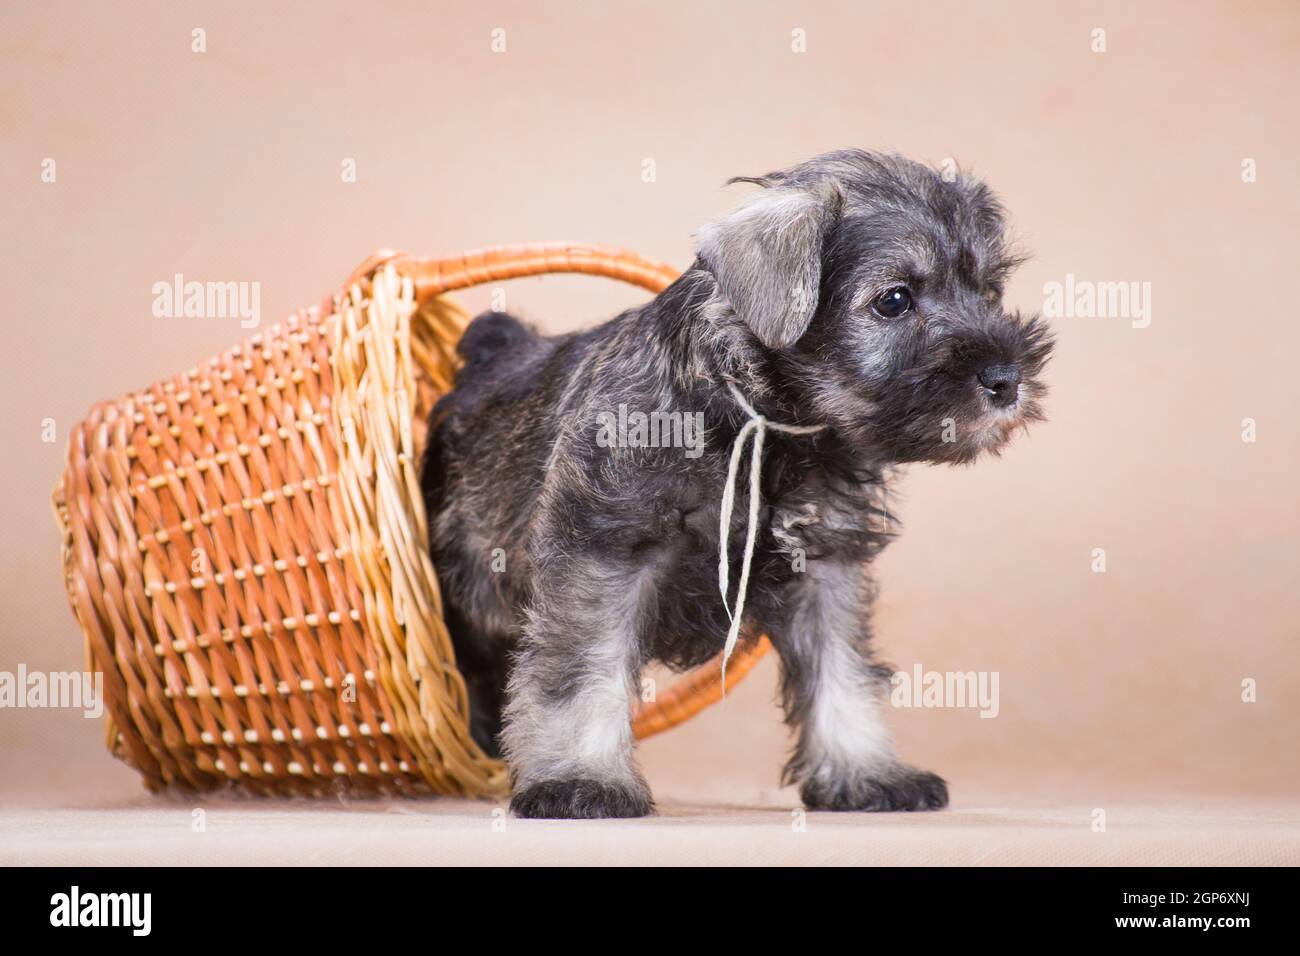 Small, color pepper and salt, a miniature schnauzer puppy crawls out of a wicker basket on a beige background, indoors, in the studio Stock Photo